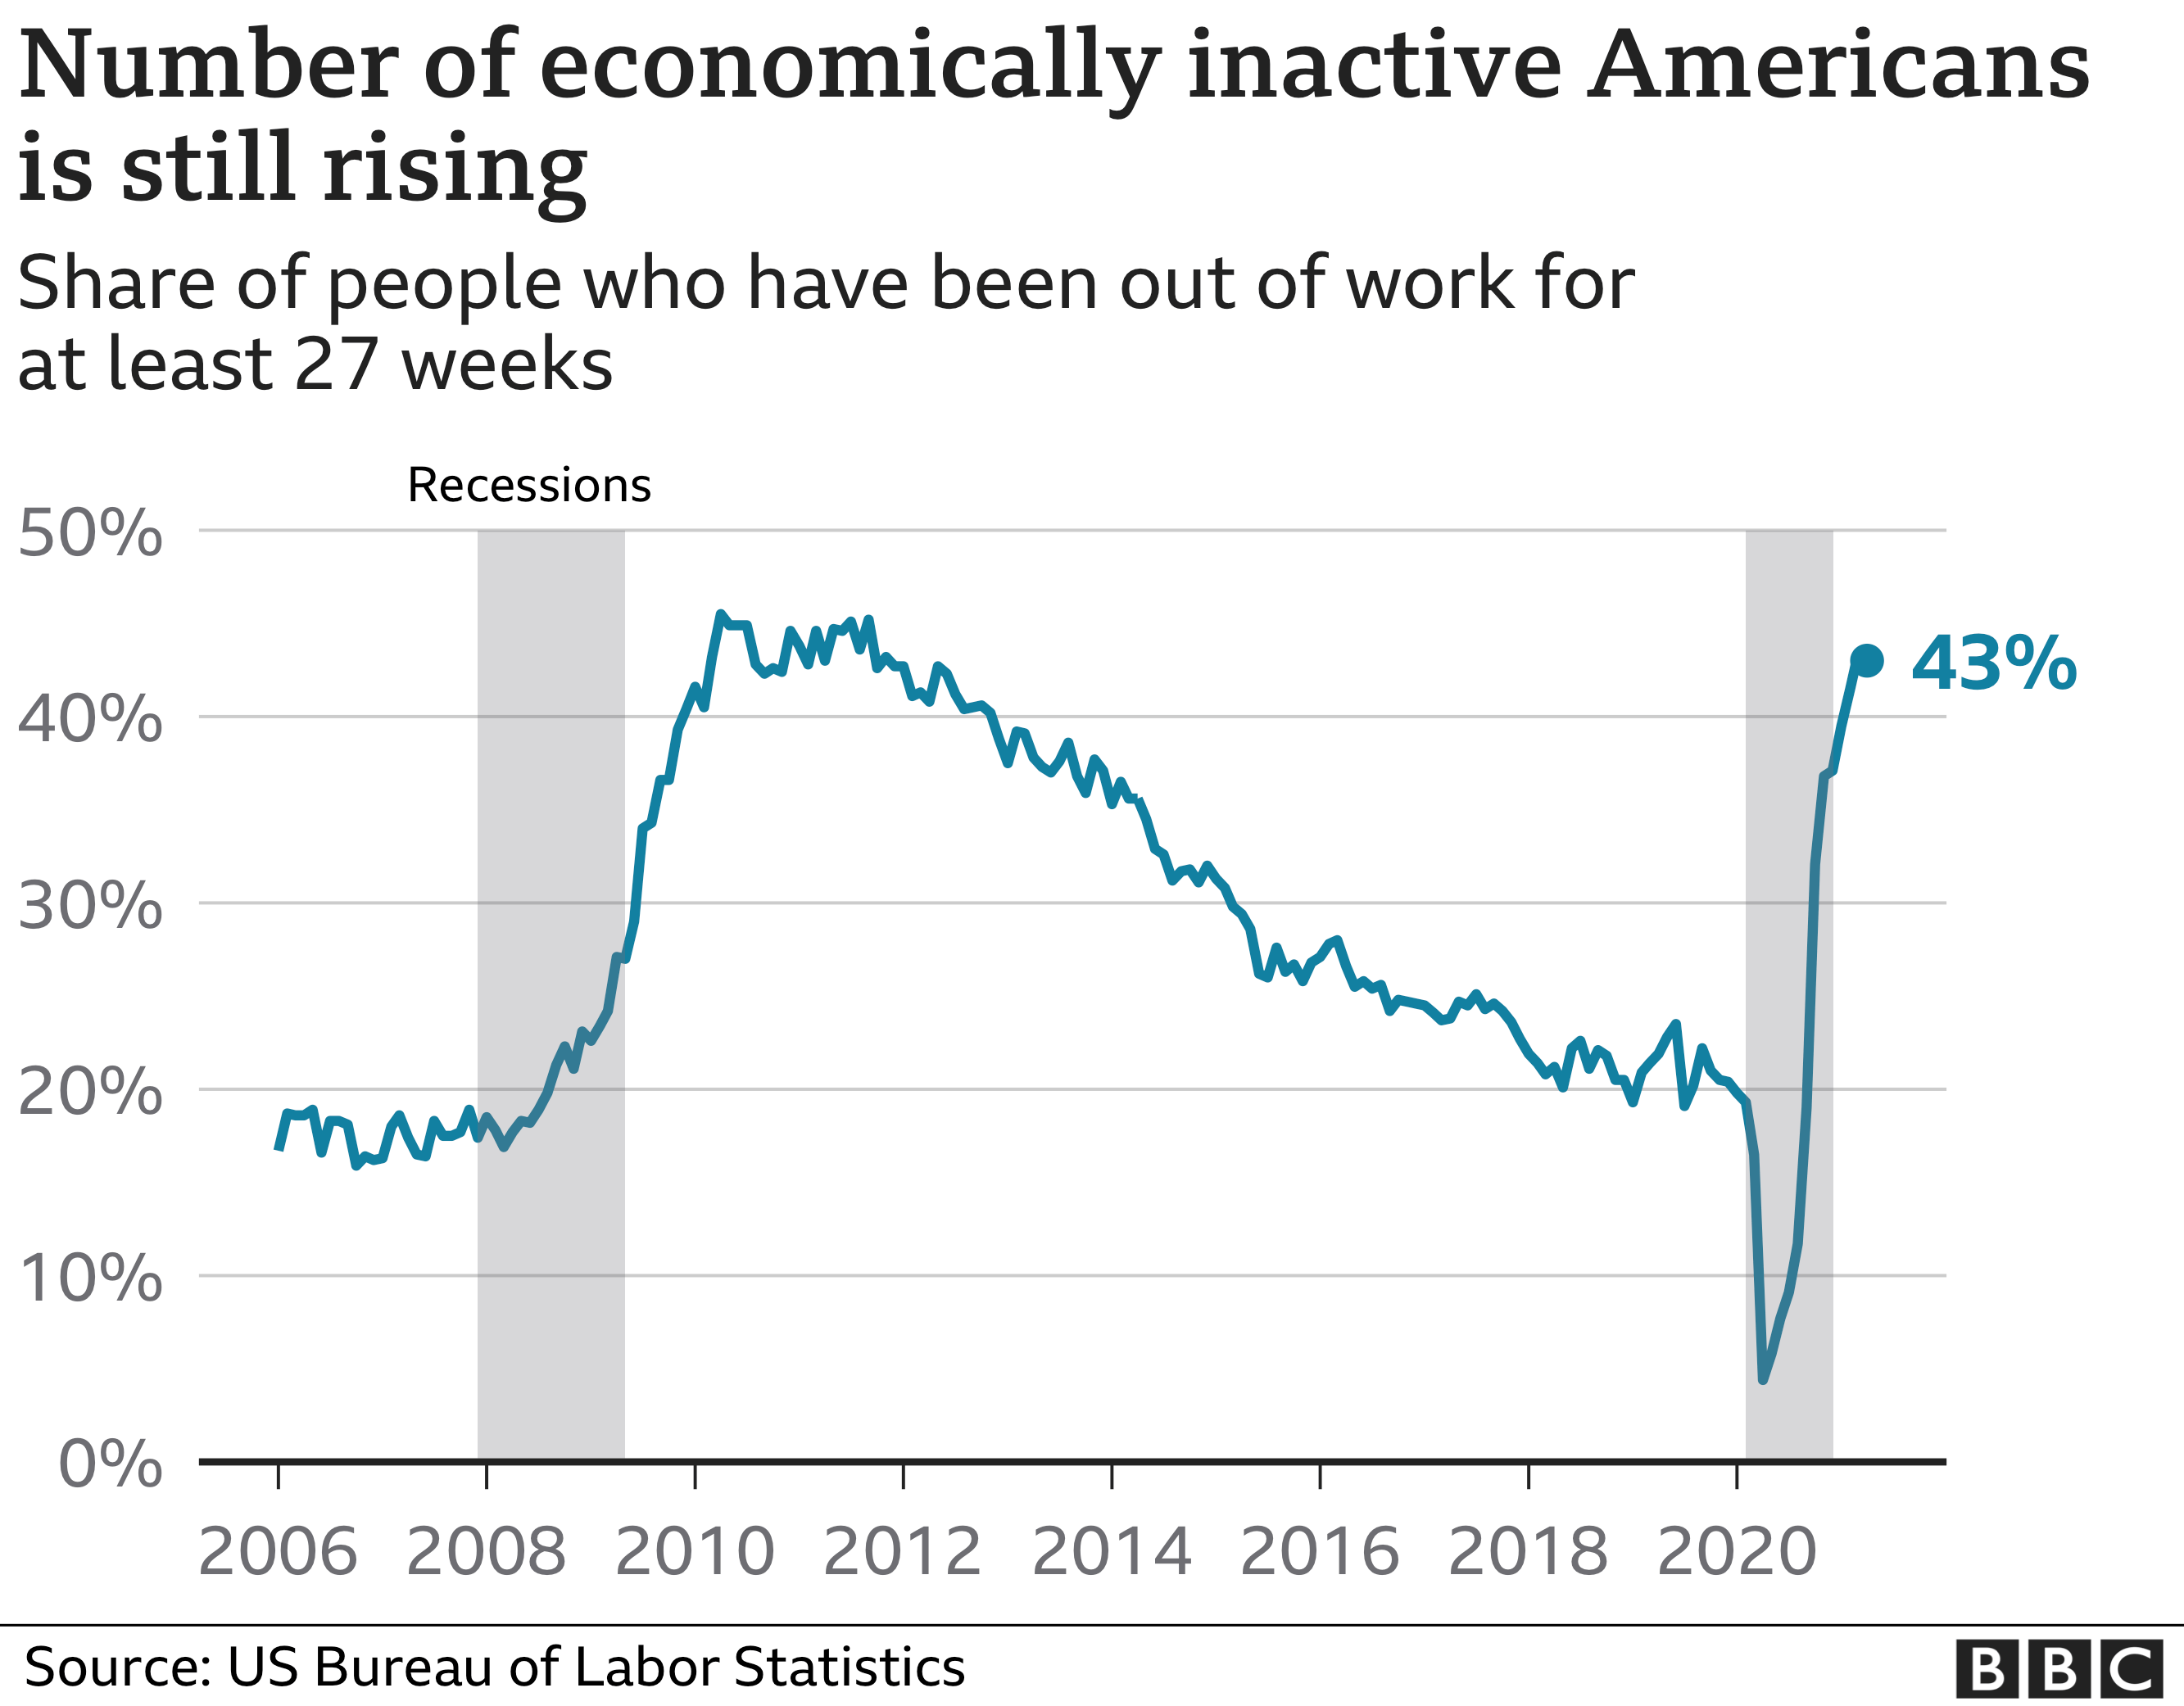 Number of economically inactive Americans is still rising